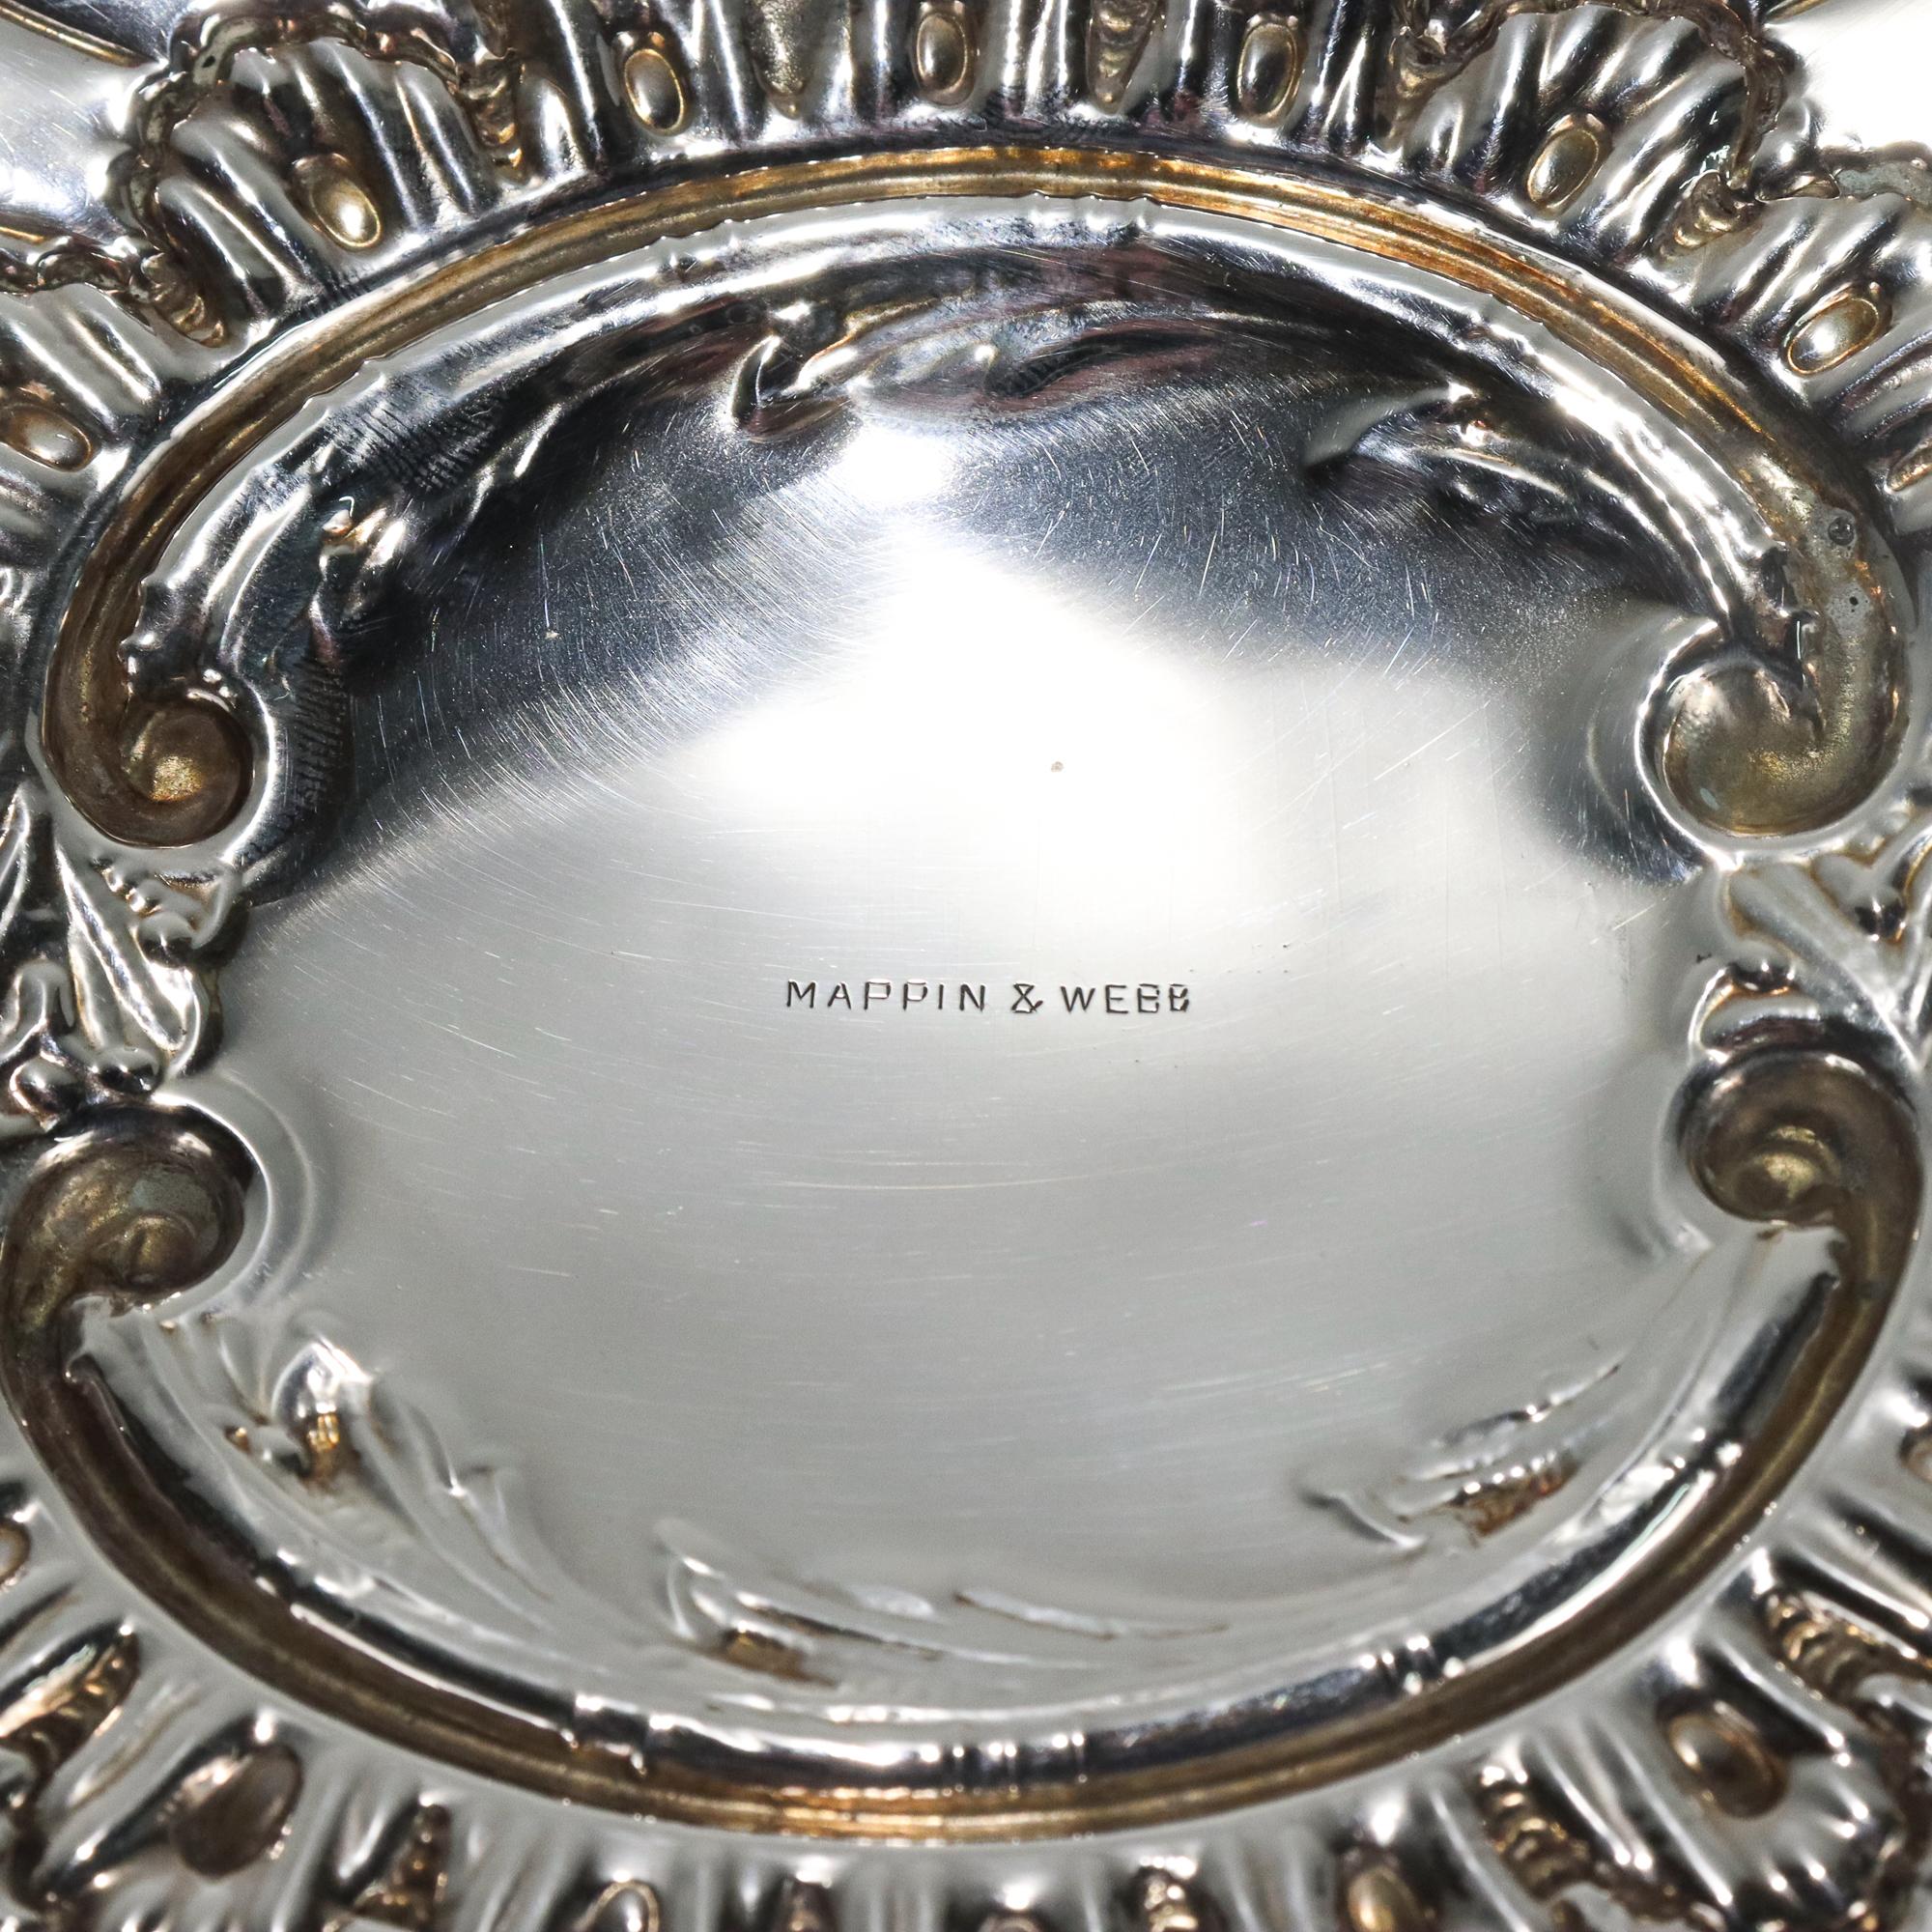 Antique Mappin & Webb Ornate Reticulated Repousse Sterling Silver Dresser Tray For Sale 7